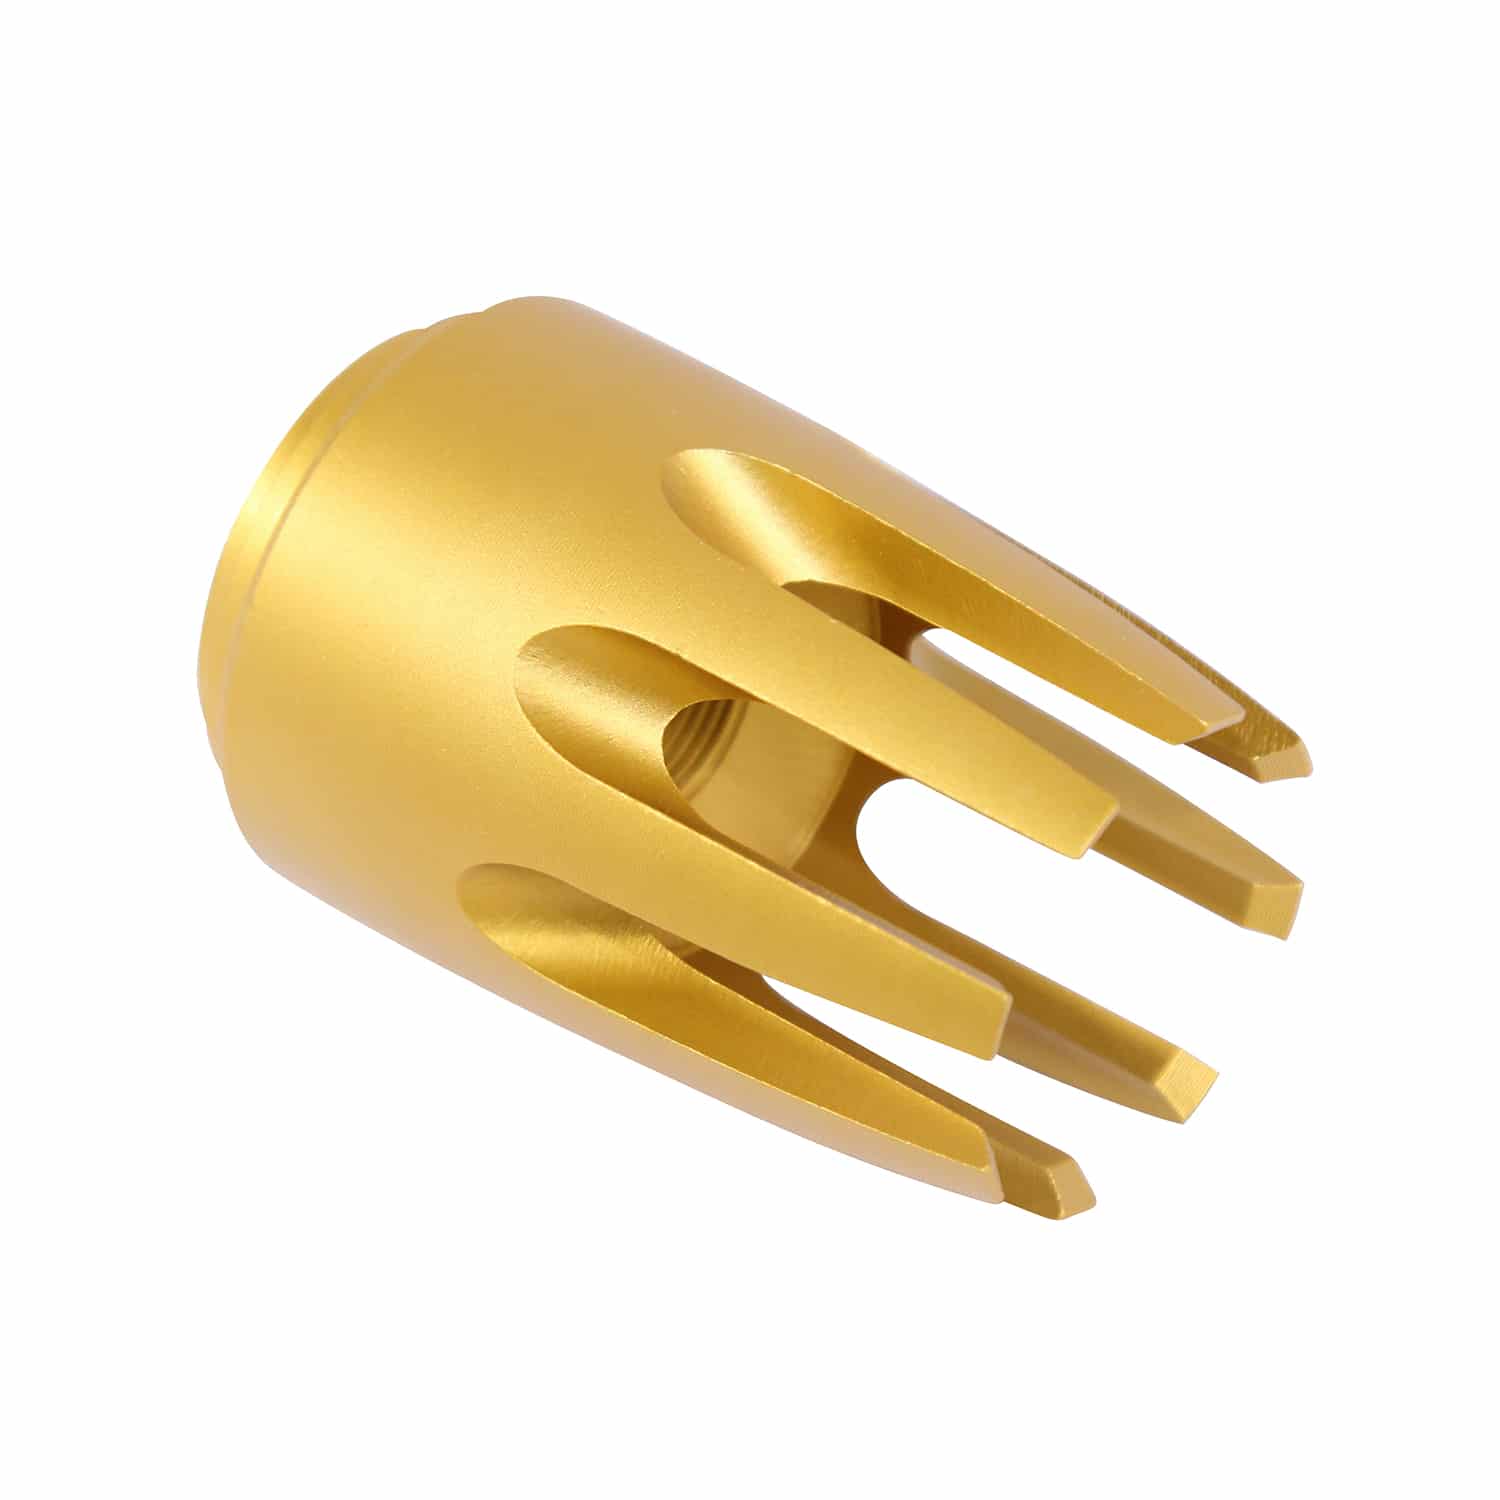 AR15 Claw Multi-Prong Flash Hider In Anodized Gold